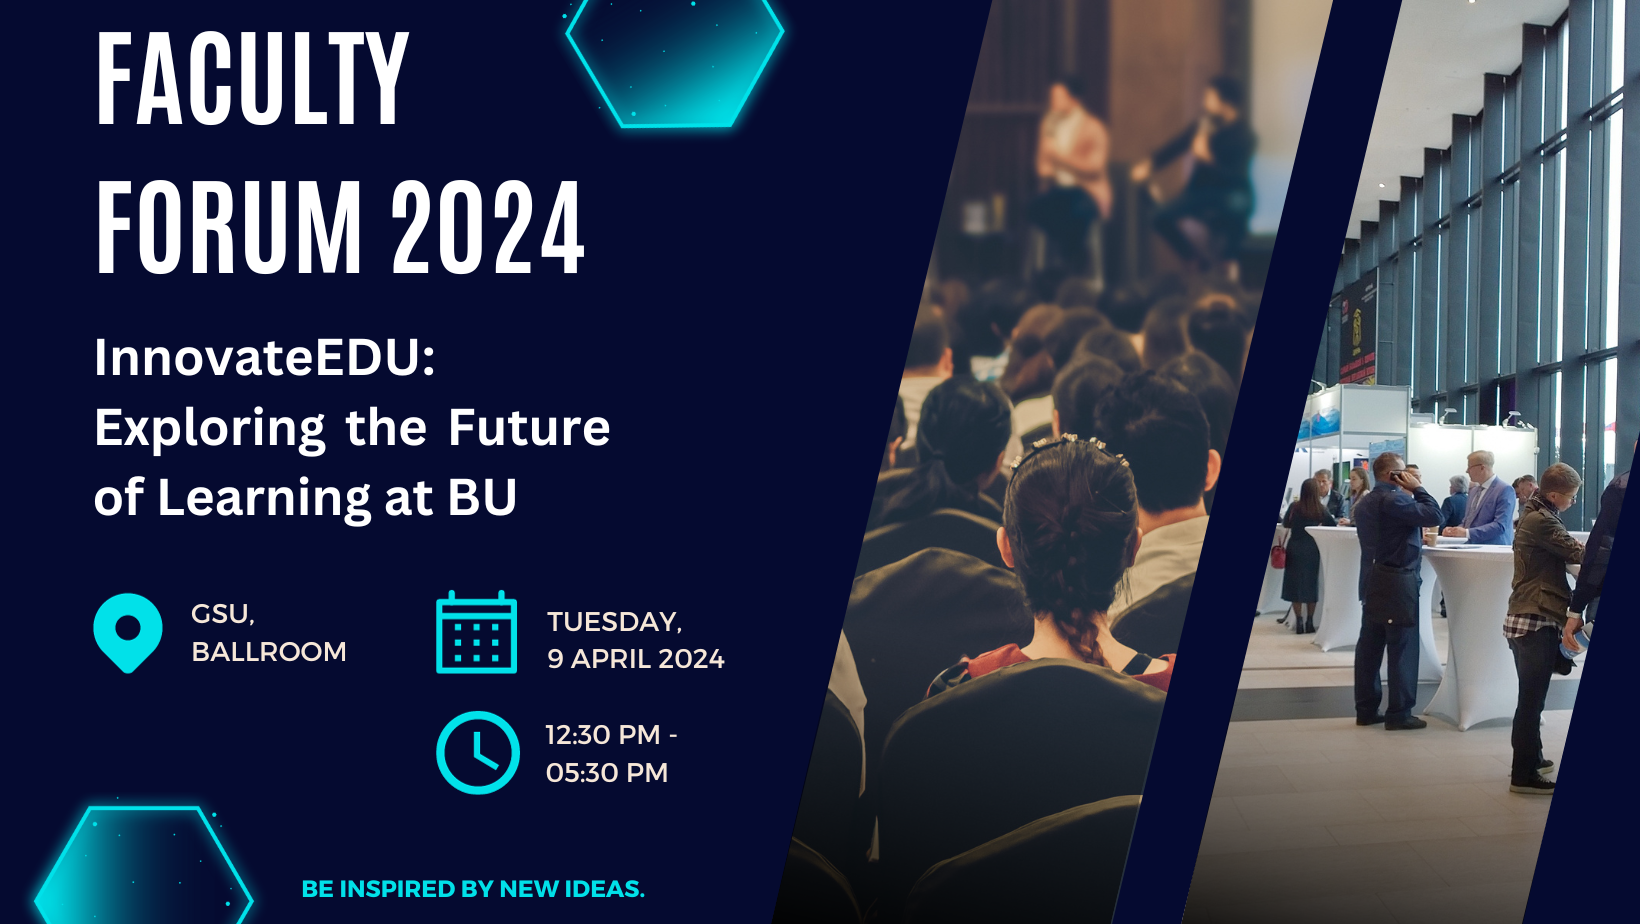 Faculty Forum Save the Date. InnovateEDU: Exploring the Future of Learning at BU. Location: GSU, Ballroom. Date: Tuesday, April 9, 2024. Time: 12:30 to 5:30pm. Be inspired by new ideas.